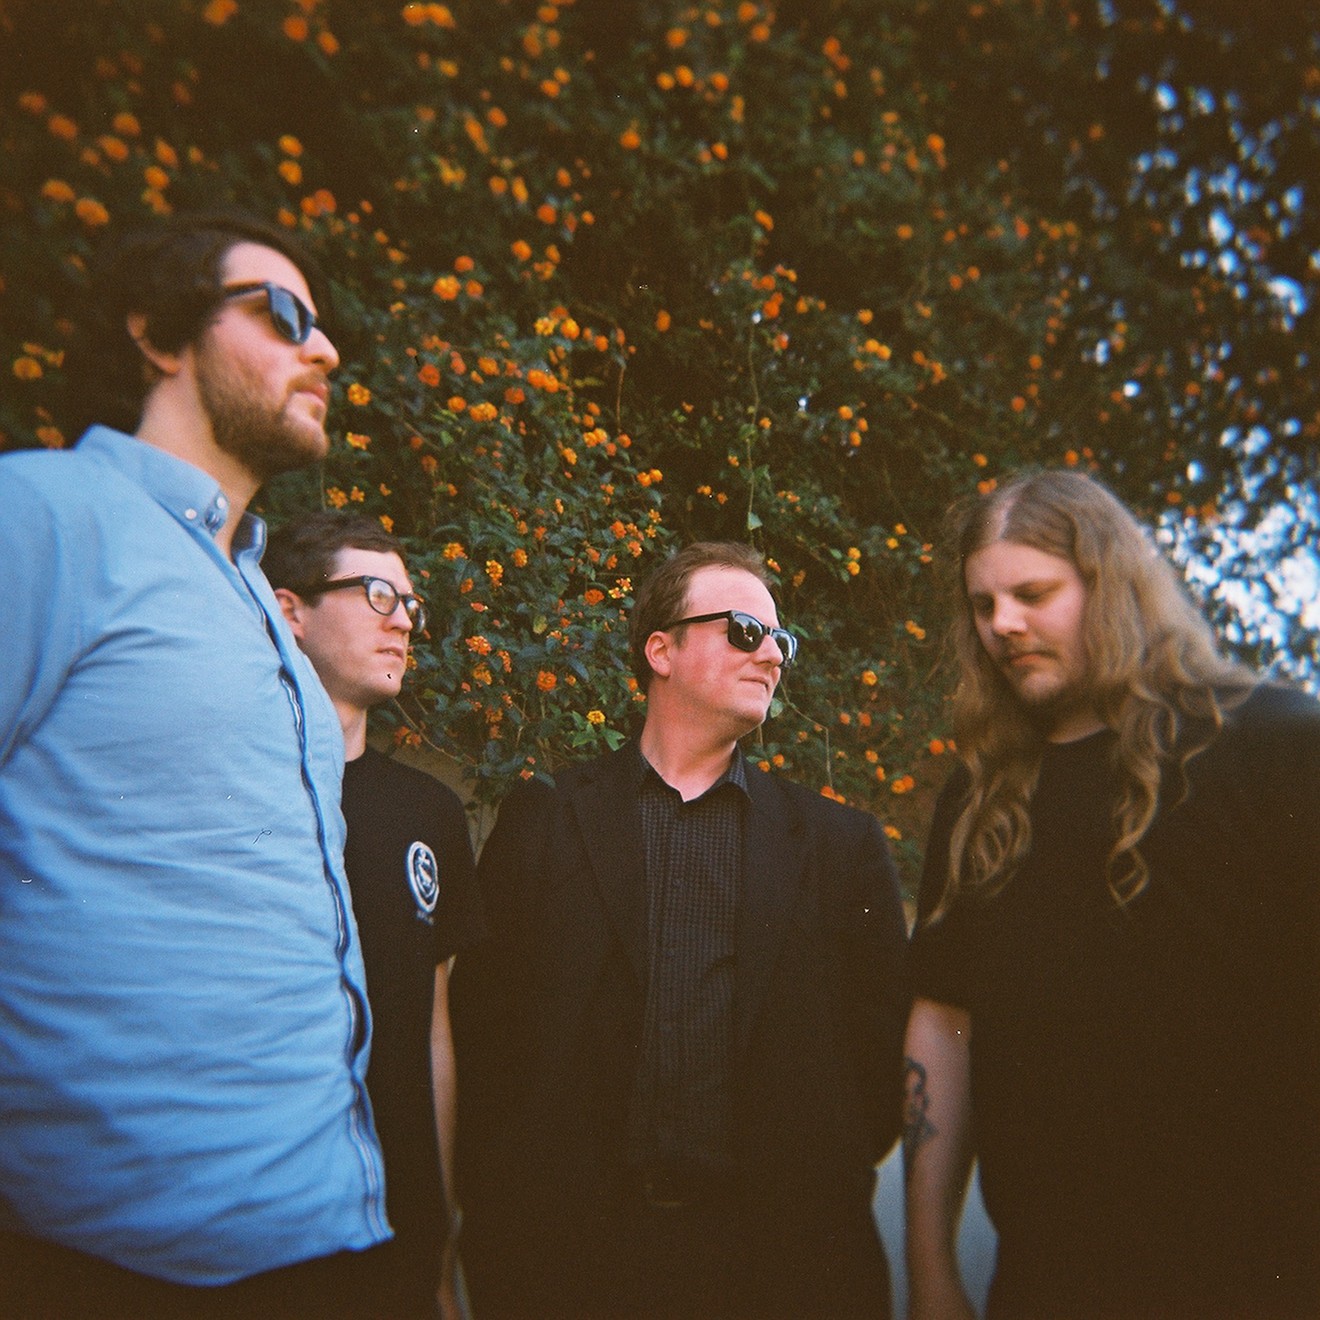 Protomartyr is pictured with Joe Casey at the center.